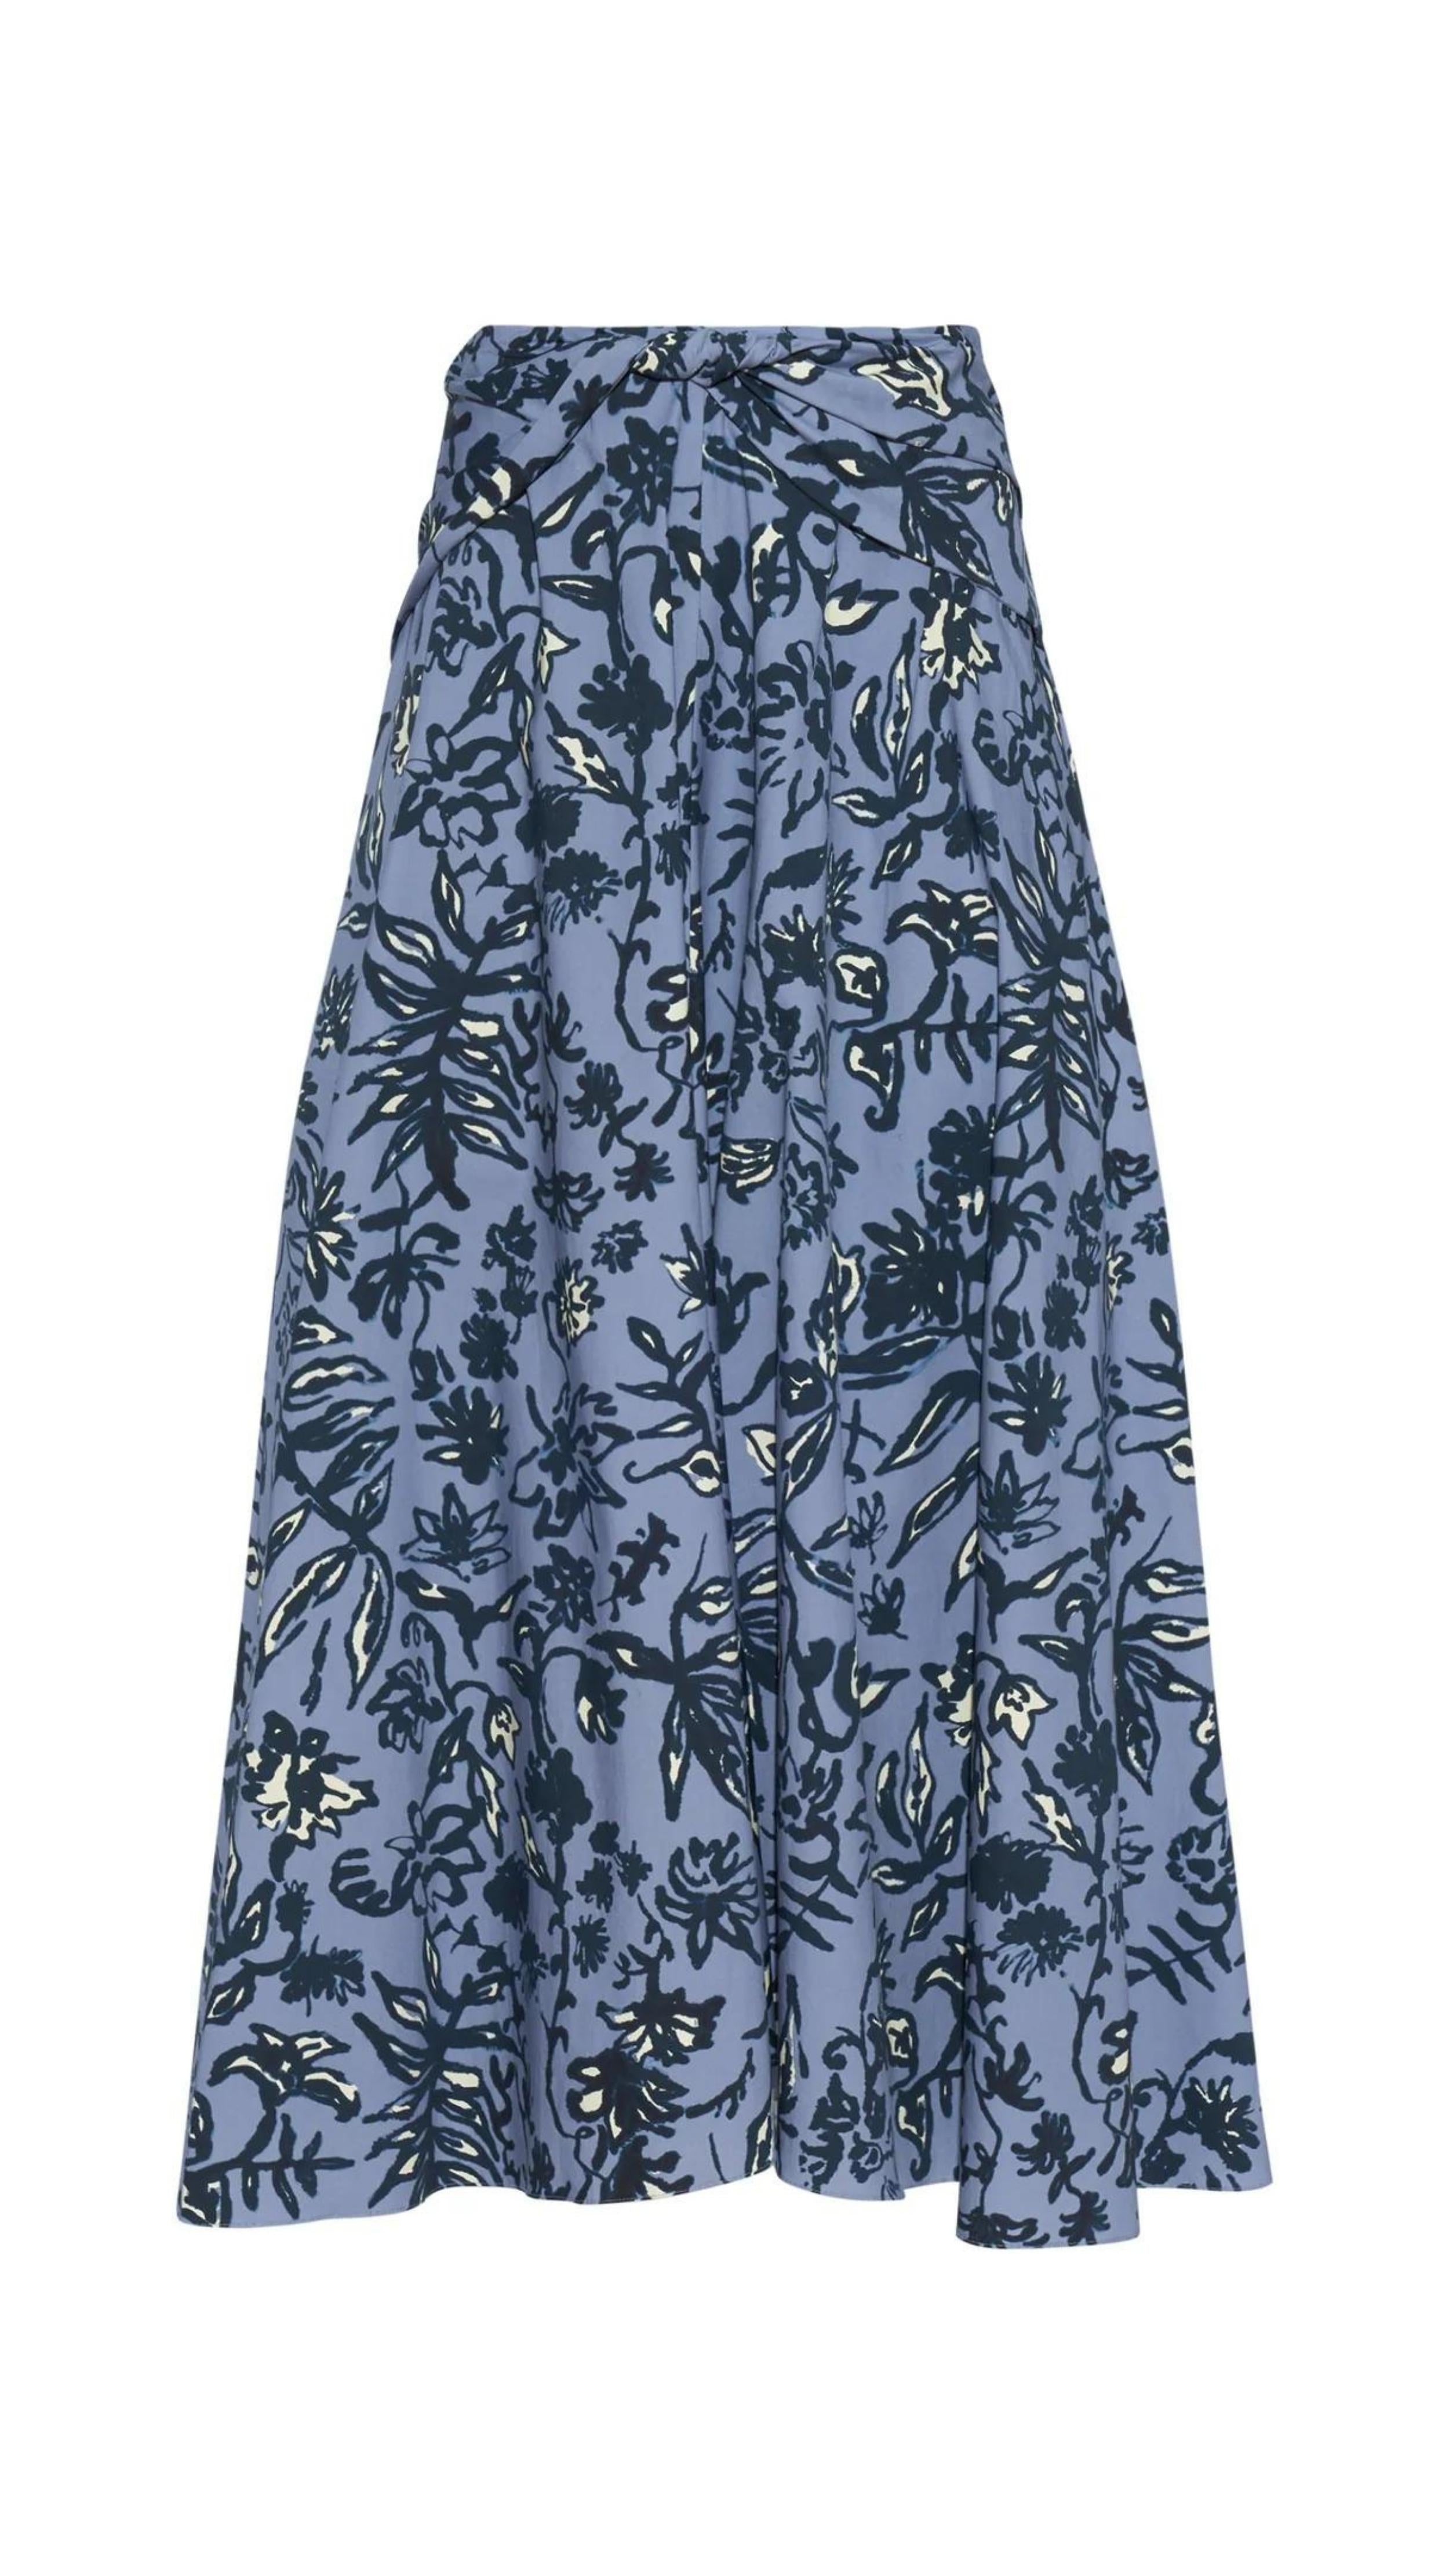 Altuzarra Pythia Skirt in Amsonia Shibori Flower. A midi length, aline style skirt with beautiful twist detail at the waist. Crafted in 100% cotton with a natural ecru color floral print over a light blue background. Shown facing front. Available at experience 27 in Madrid spain.